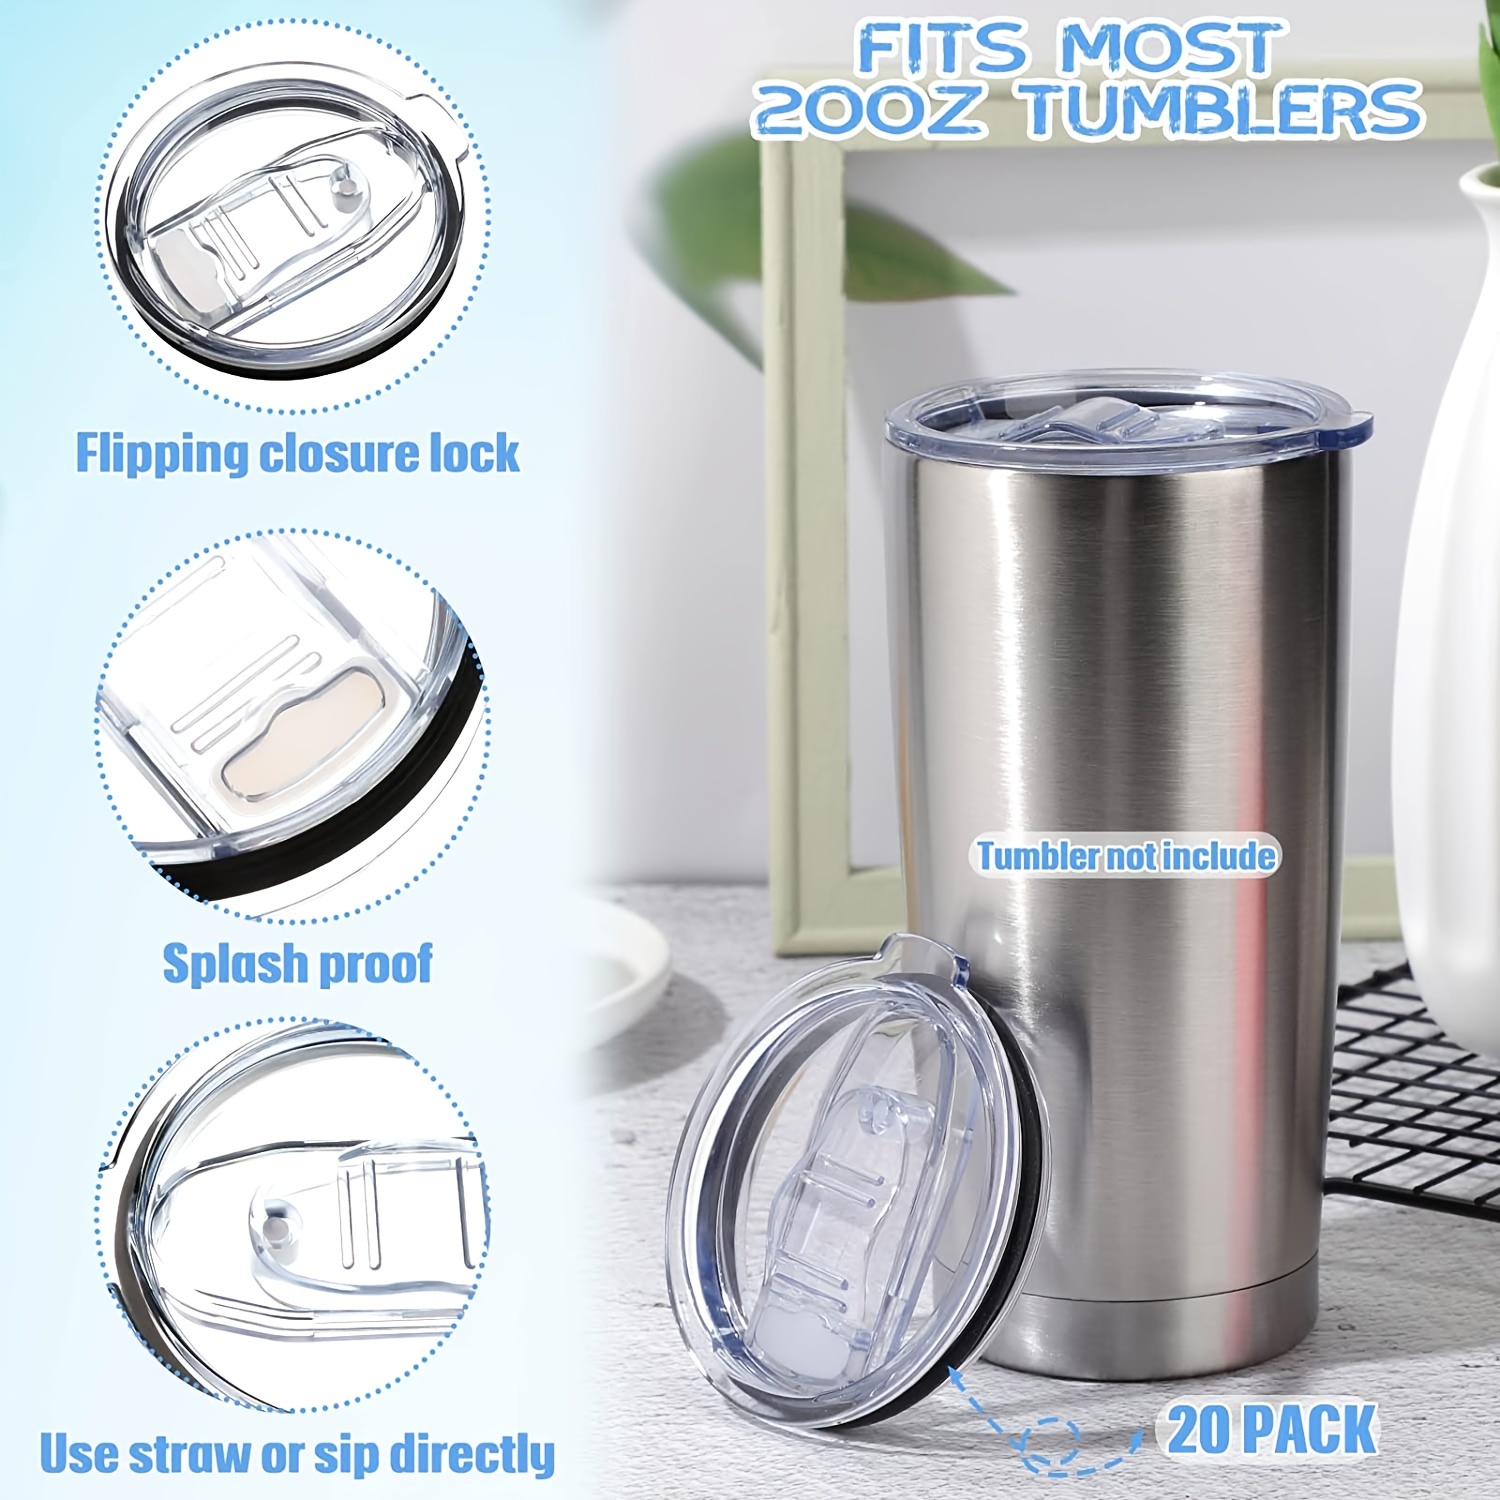 20/10 OZ - 2 Replacement Lids for Yeti Tumblers like Yeti Lids - 3.3 Inch  Diameter - Spill Proof Lids for Yeti Tumblers - Tumbler Lid for Yeti  Tumbler